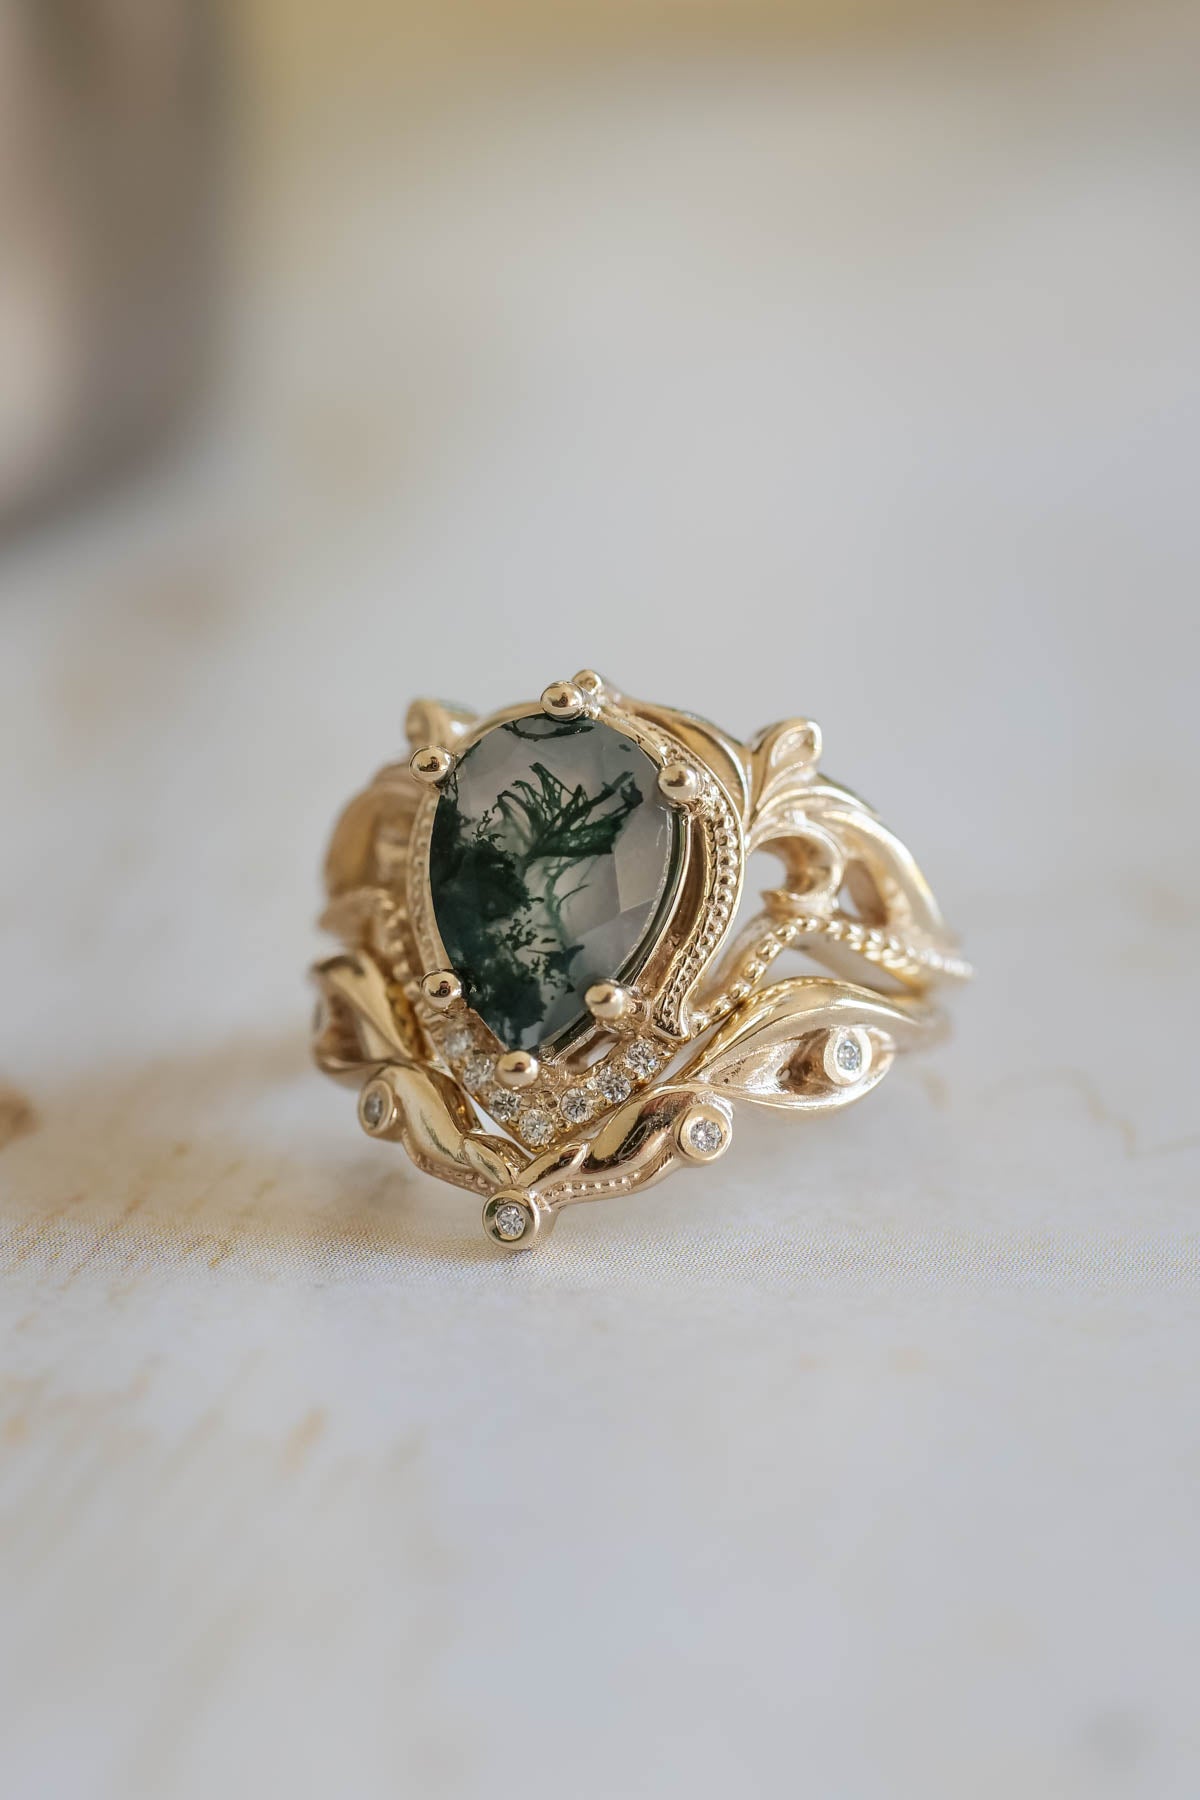 Moss agate engagement and wedding ring set / Lida - Eden Garden Jewelry™